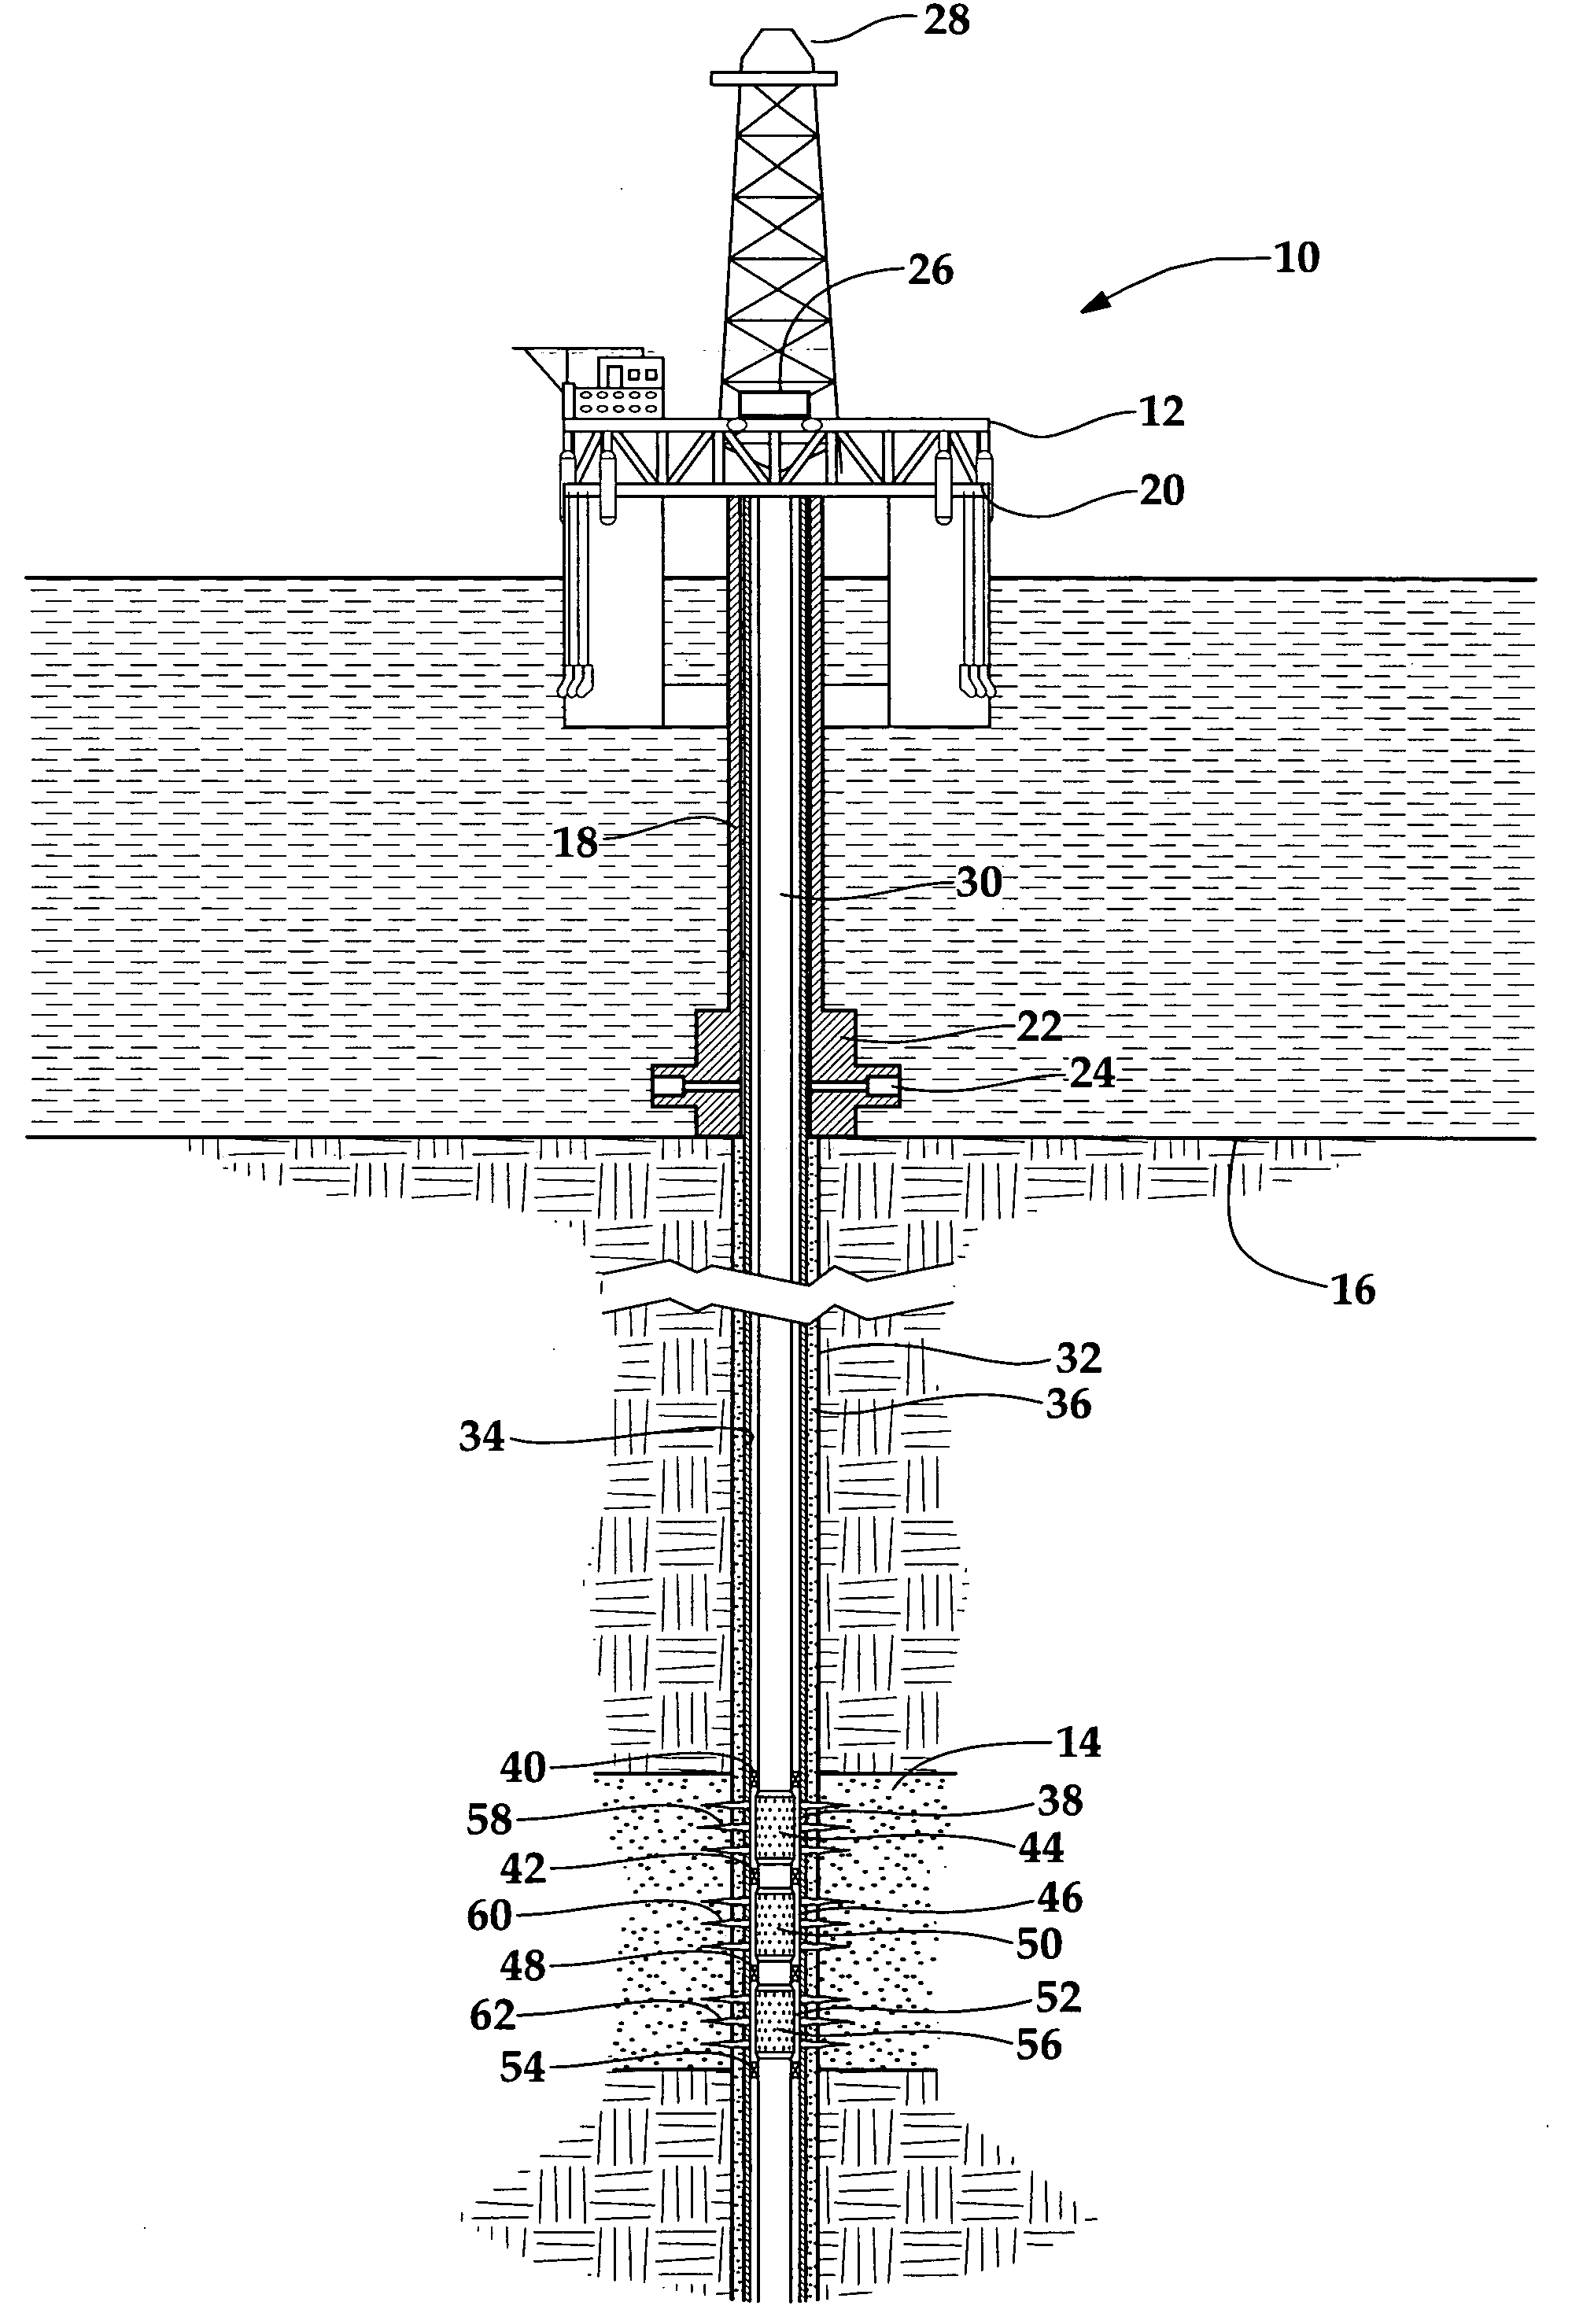 Apparatus and method for reducing water production from a hydrocarbon producing well